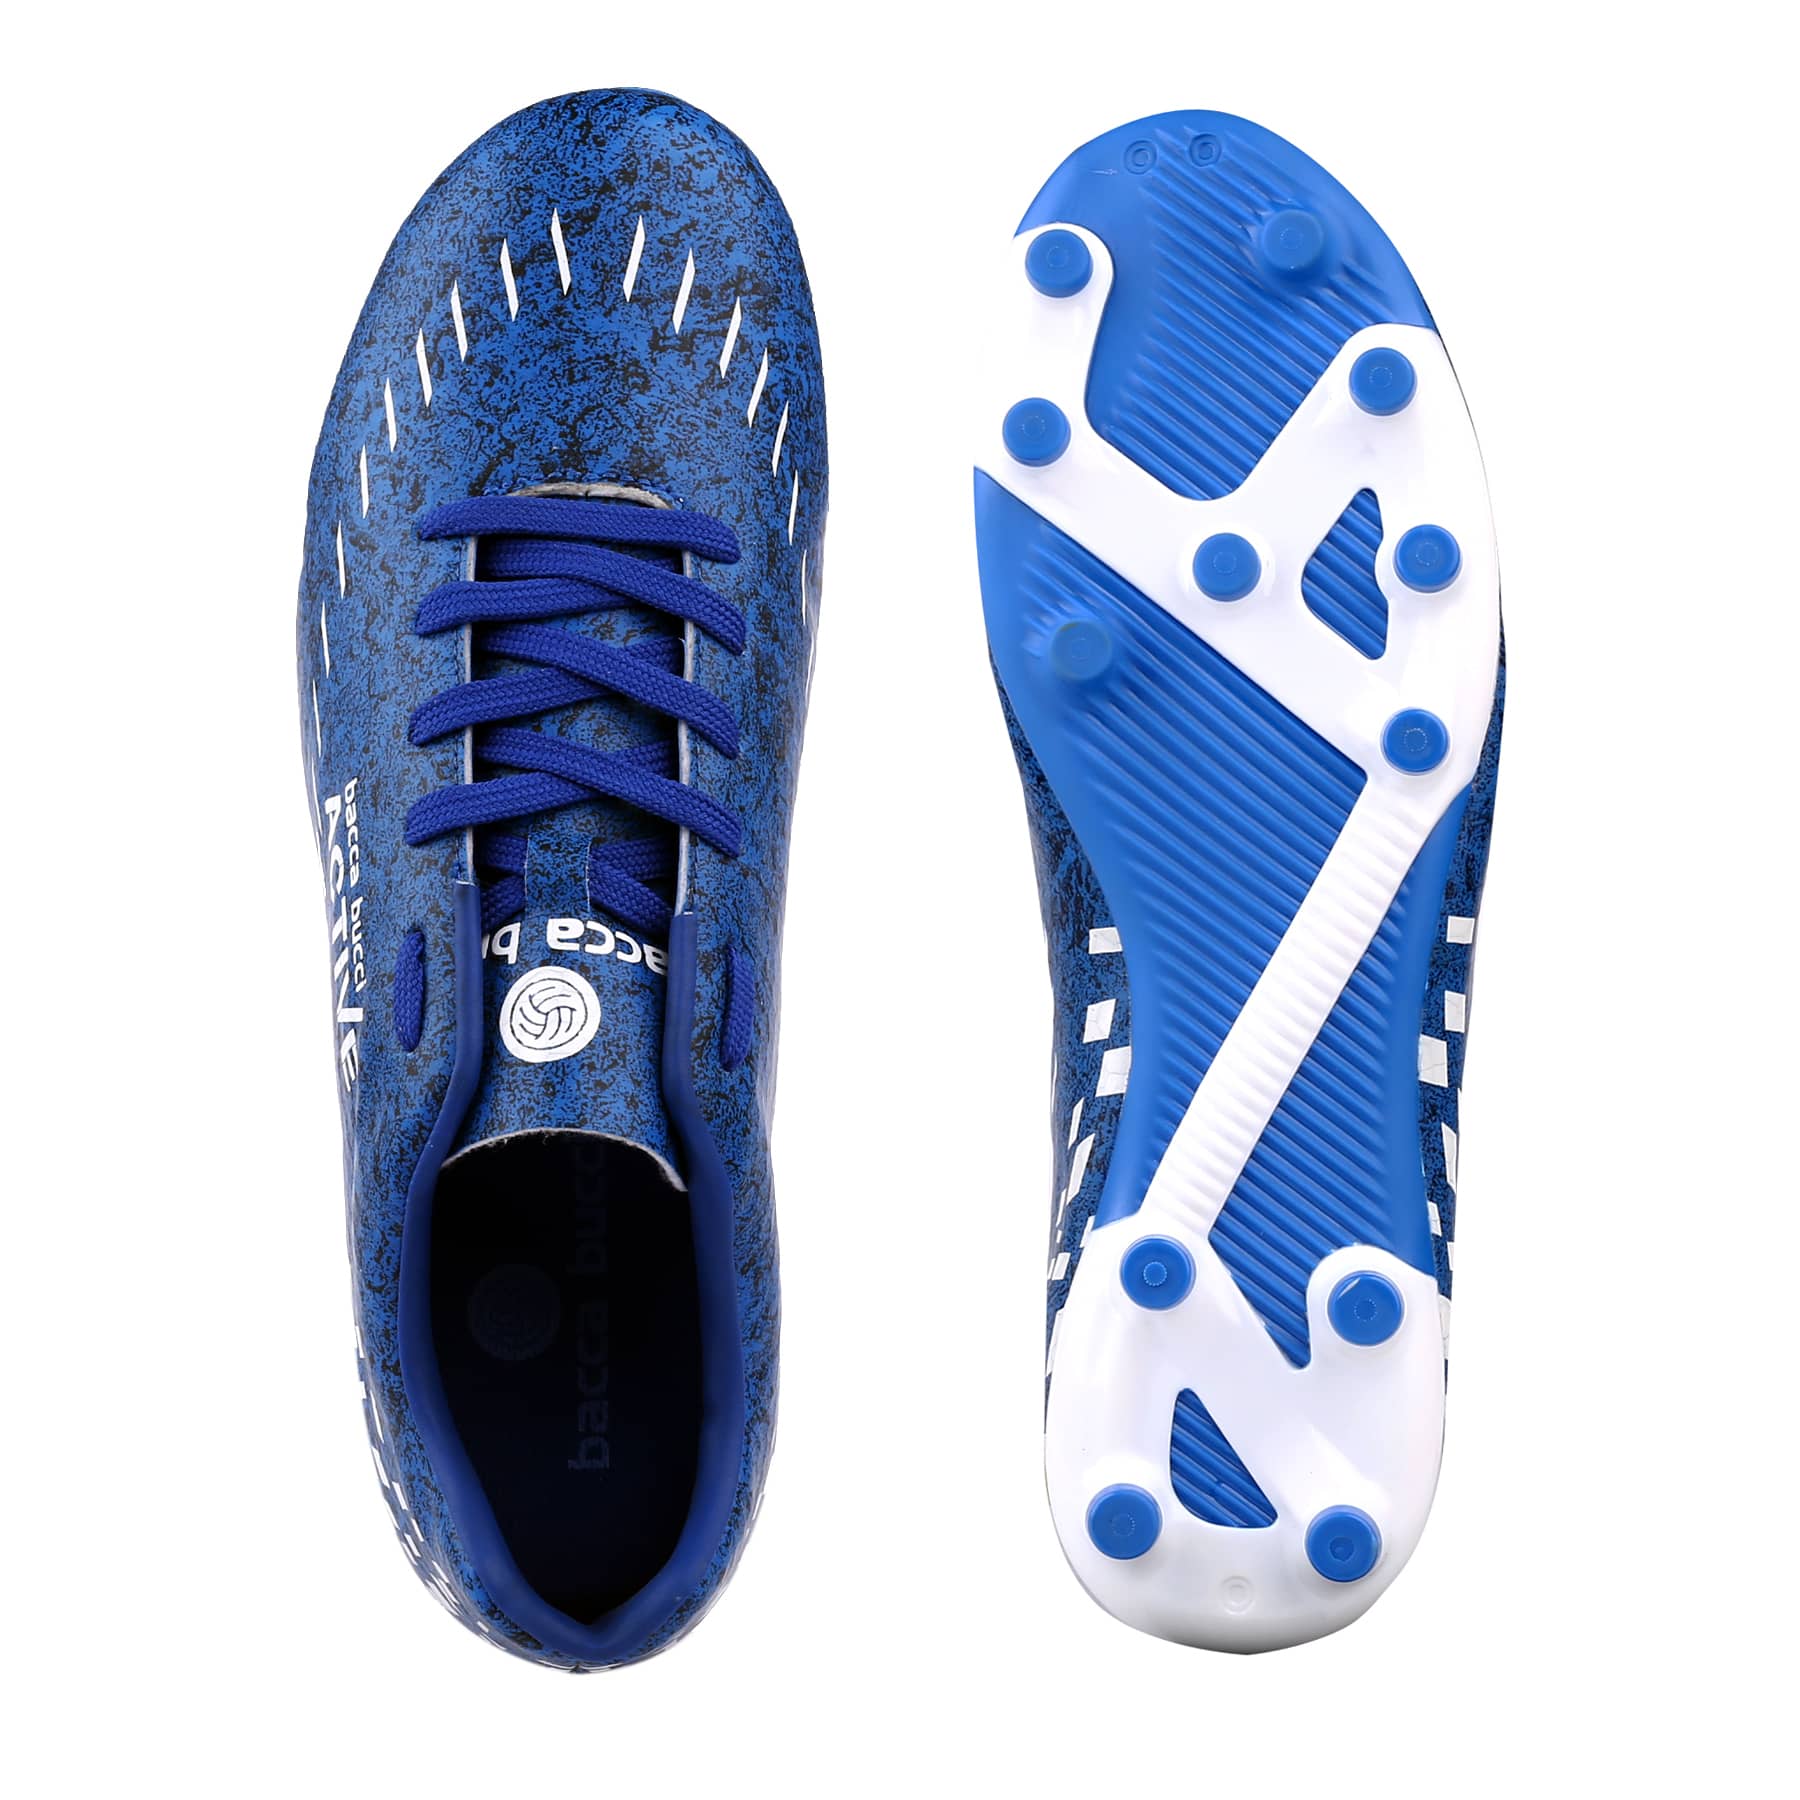 Bacca Bucci BluePulse Elite Series-Men's High-Performance Soccer Cleats with Enhanced Ball Control Texturing, Superior Traction Studs, and Dynamic Fit for Precision Play